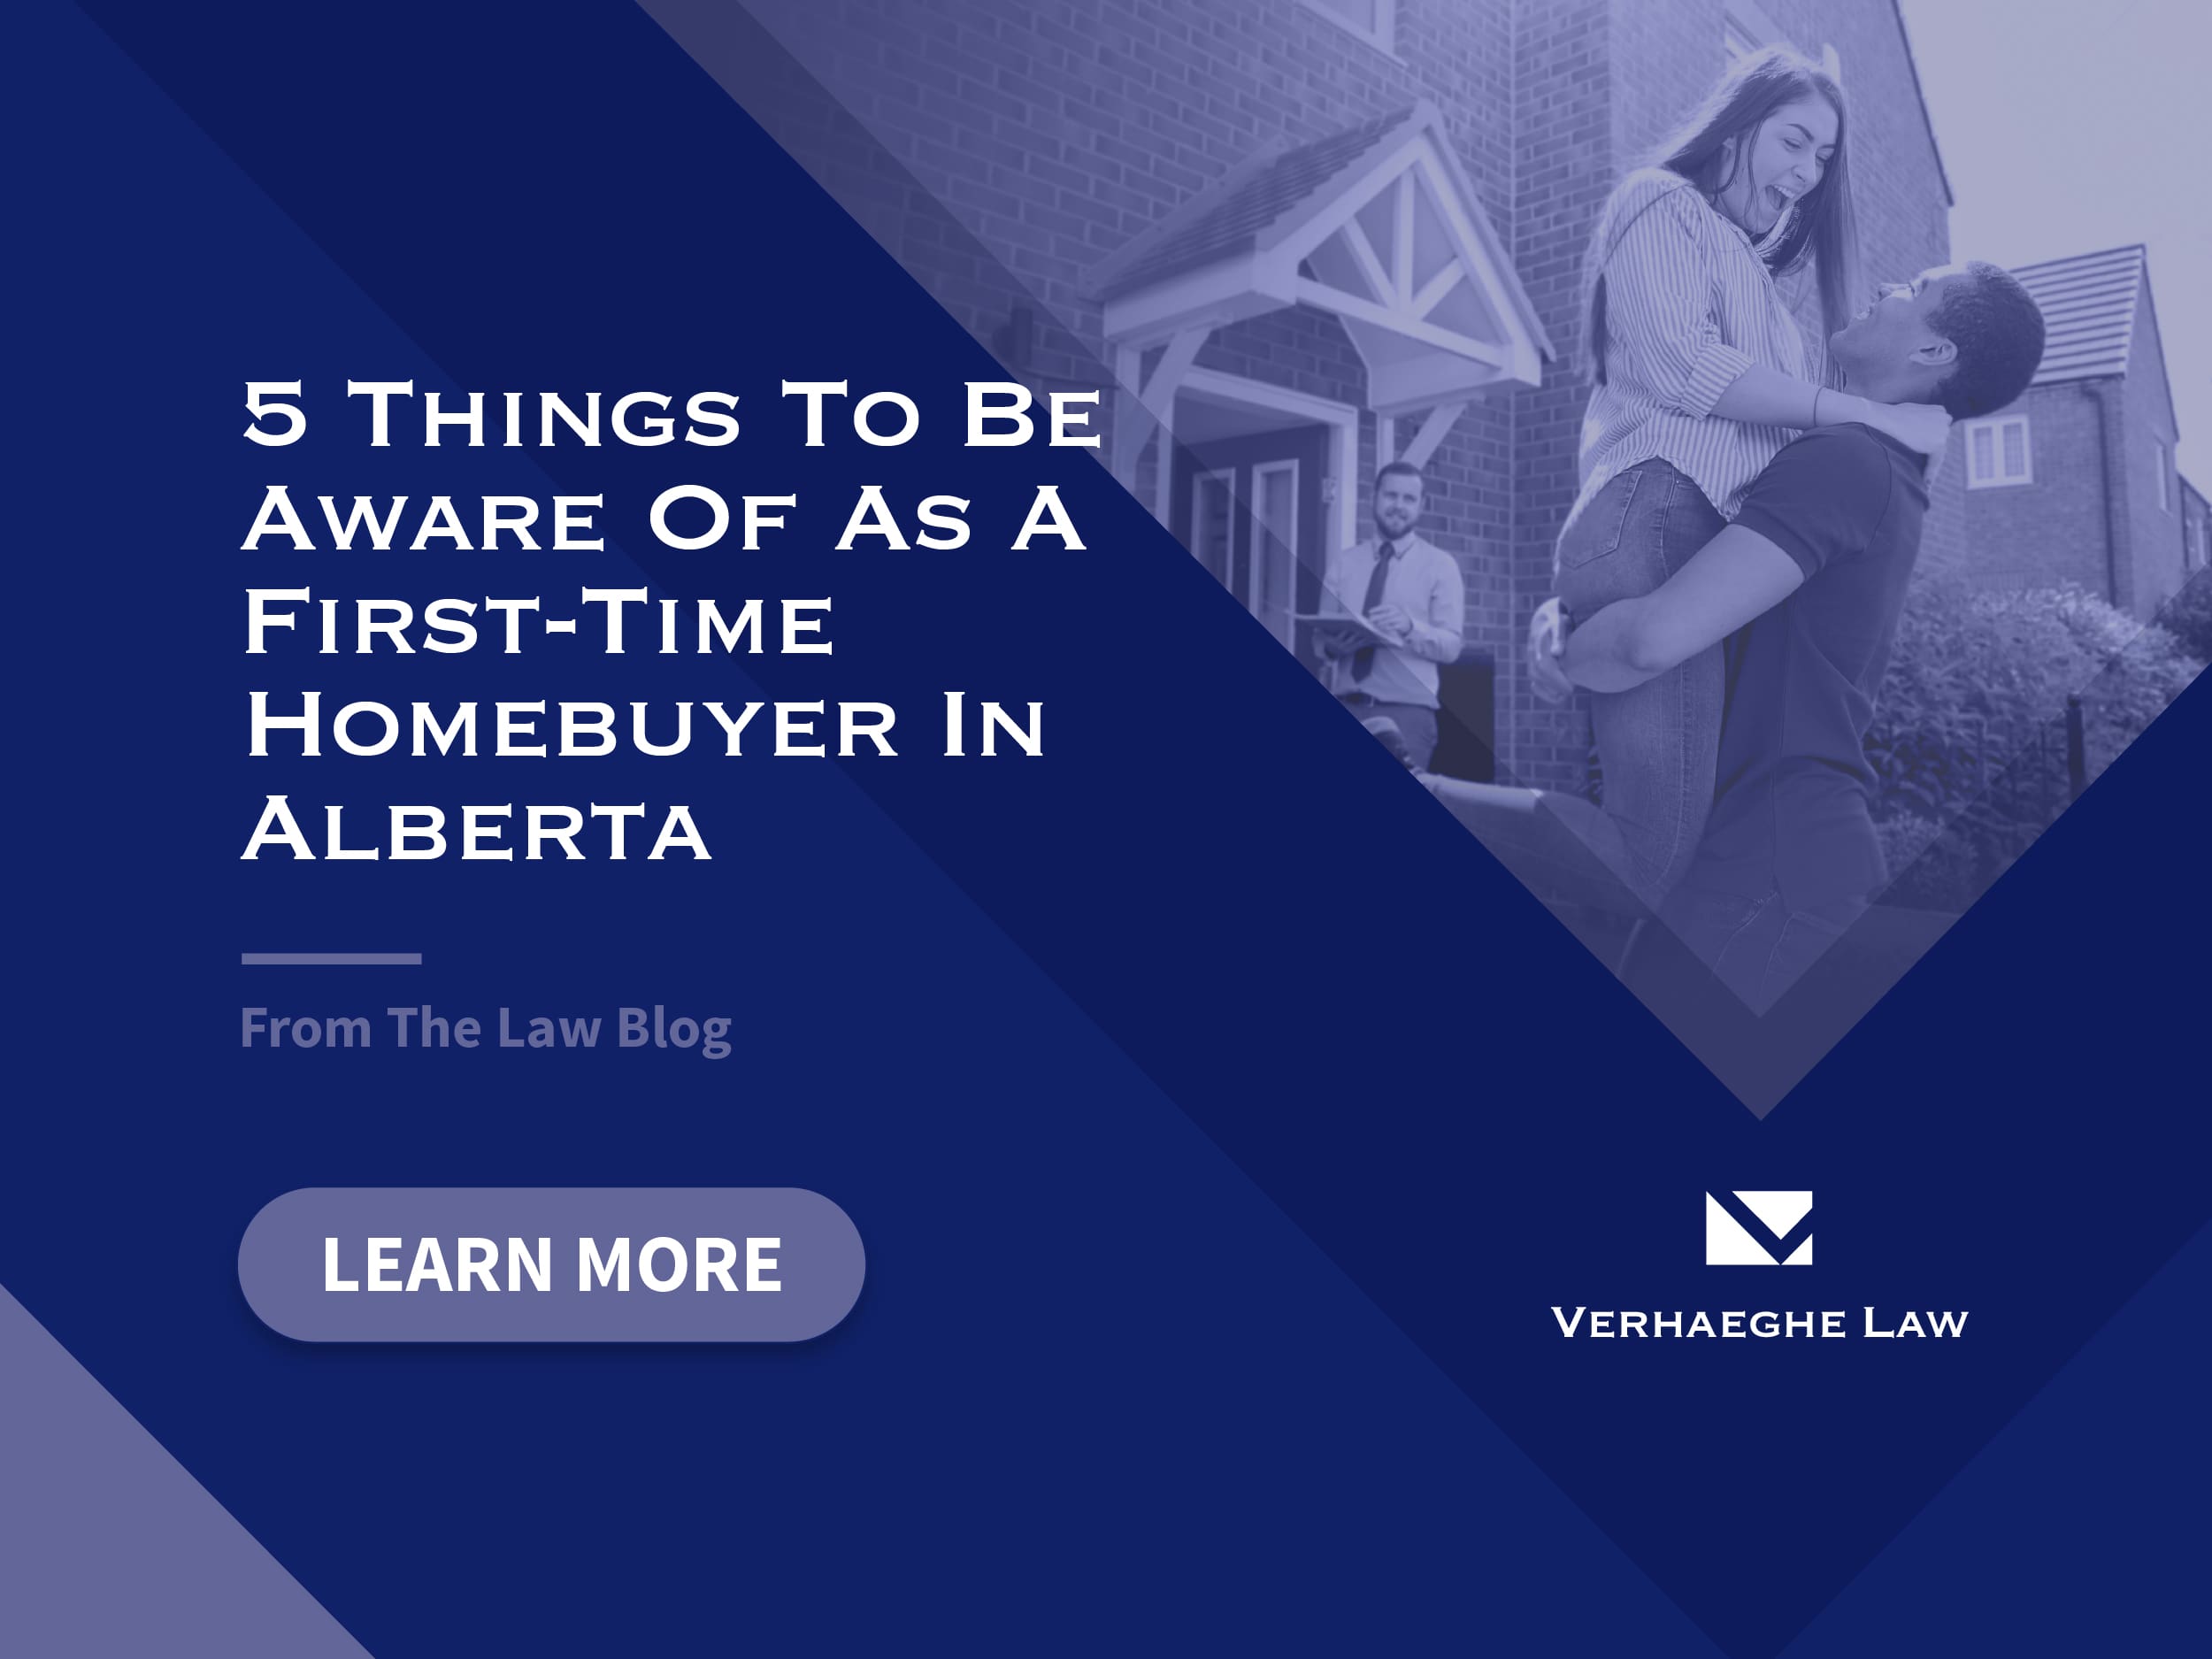 5 things to be aware of as a first-time home buyer in Alberta